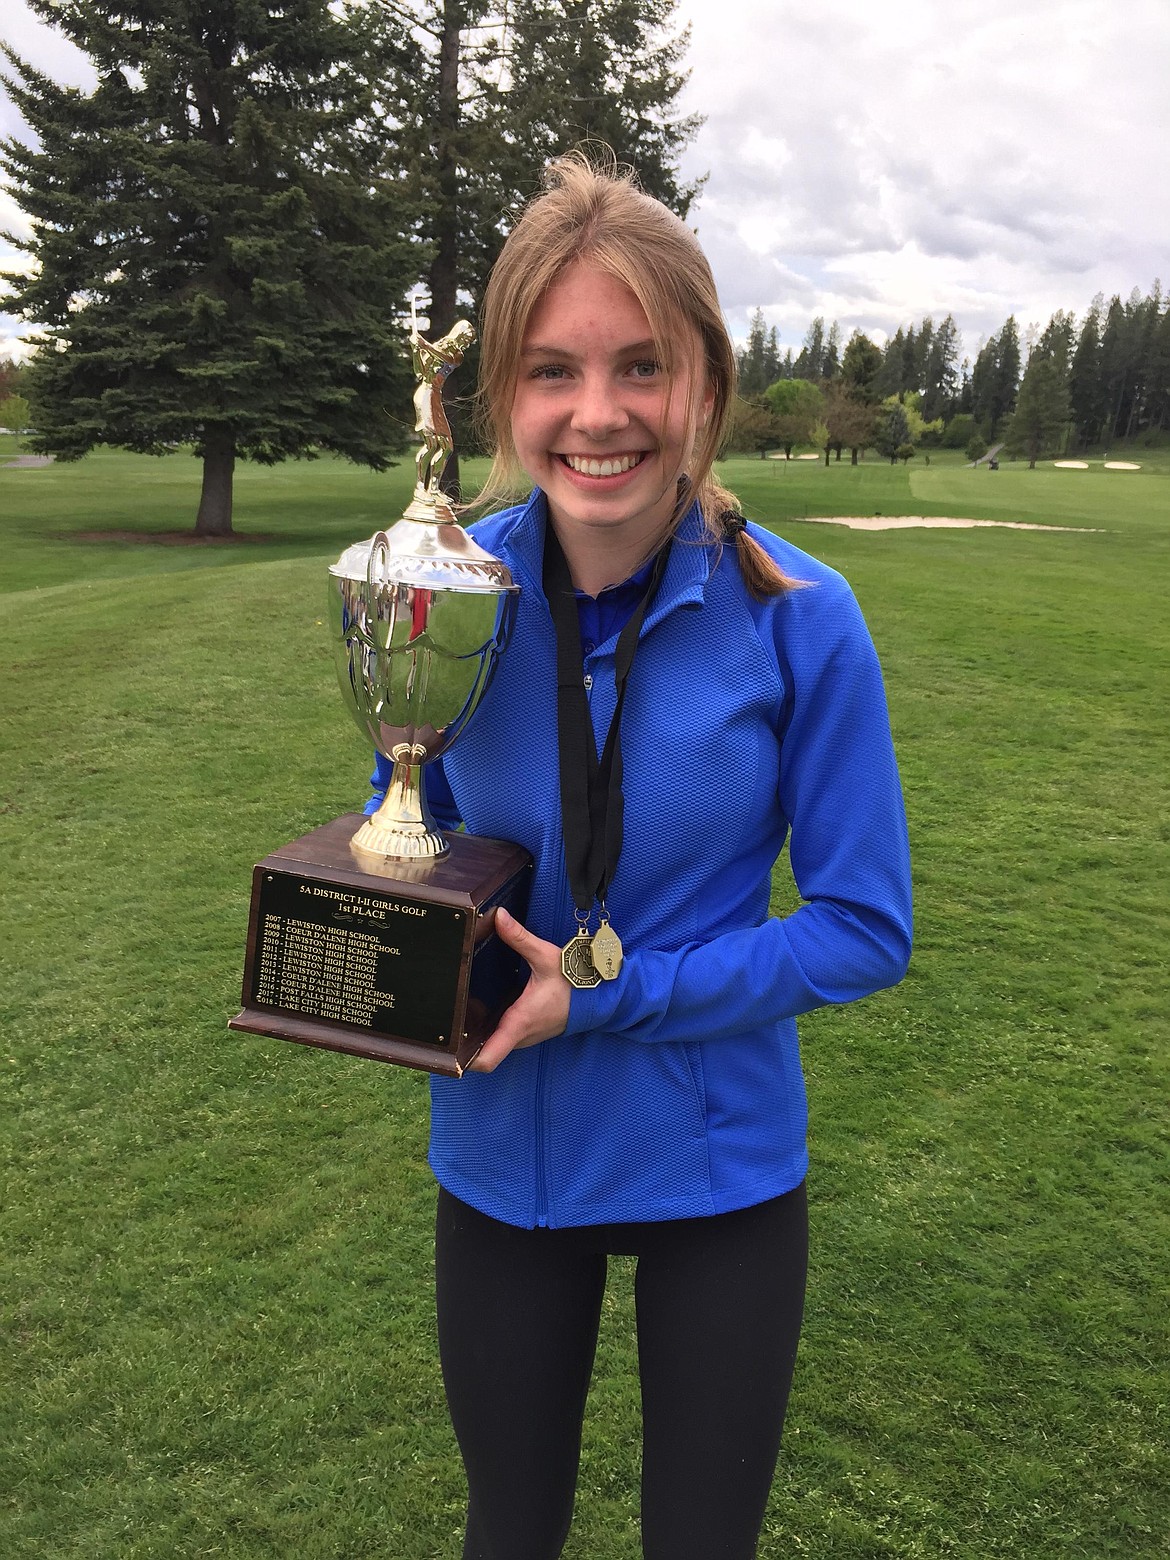 MARK NELKE/Press
Coeur d'Alene High junior Paige Crabb, holding the team trophy, earned girls medalist honors as the Viking girls won the team title at the 5A Region 1 golf tournament Monday at Avondale Golf Club in Hayden Lake.